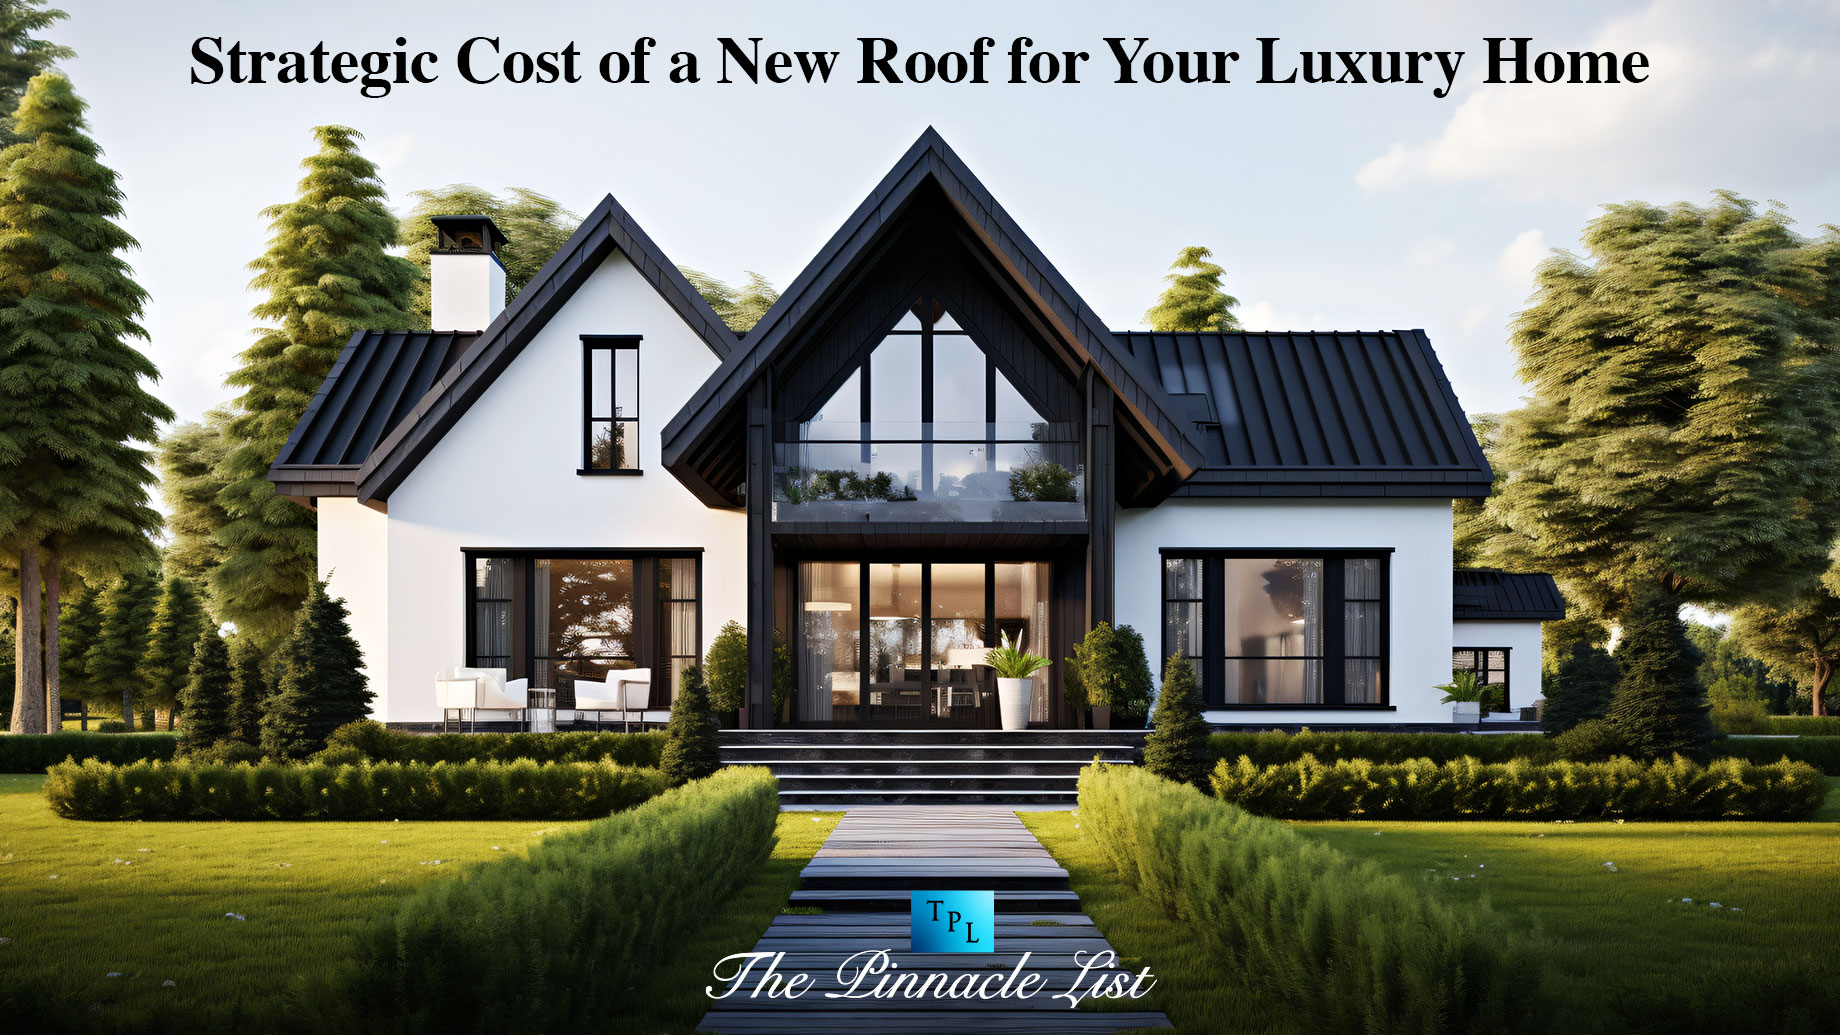 The Strategic Cost of a New Roof for Your Luxury Home